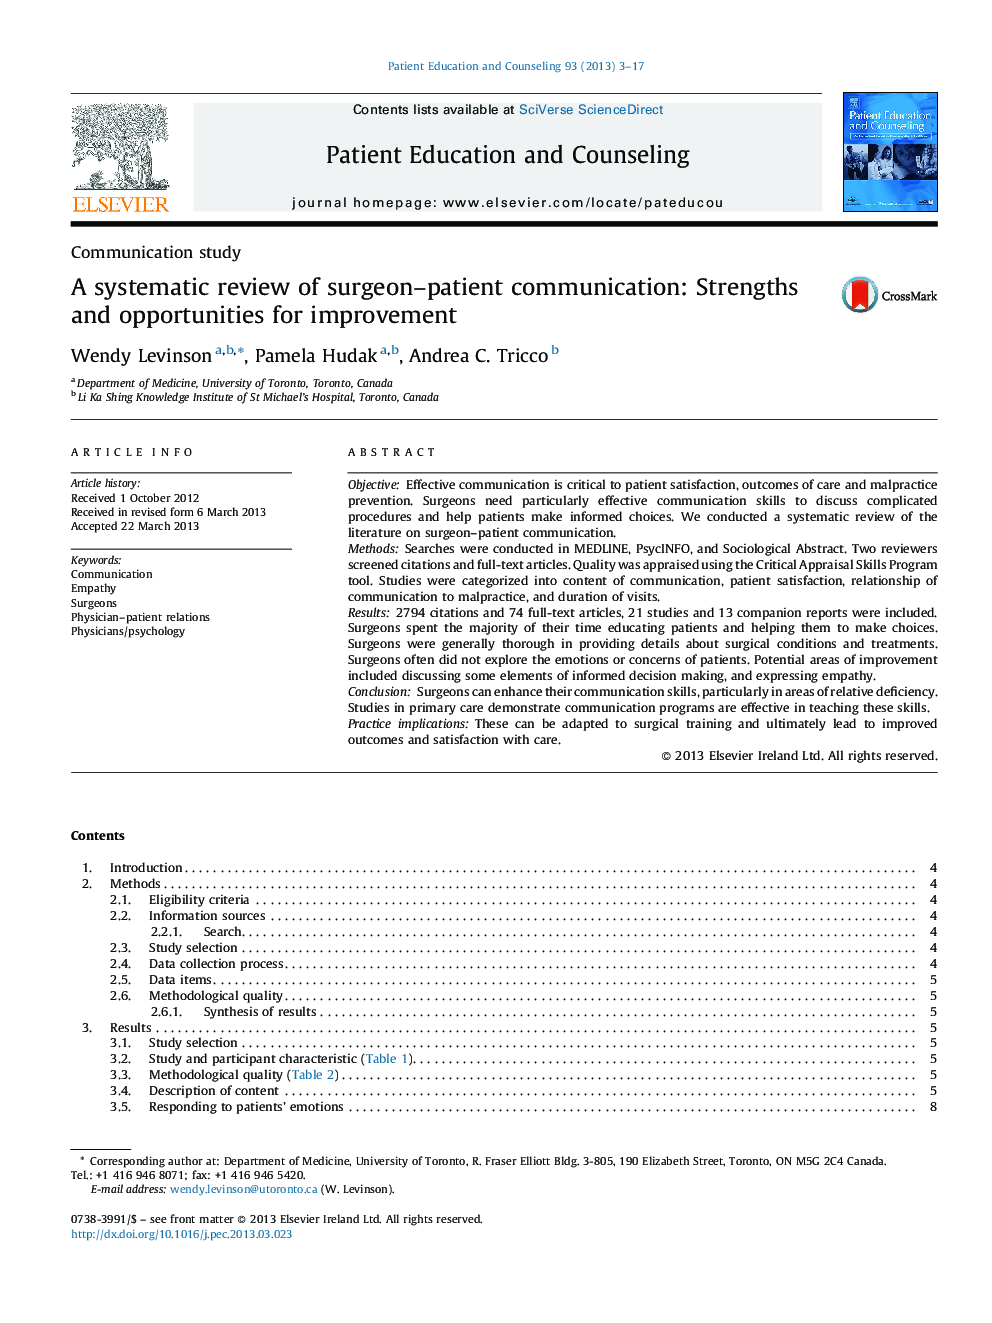 A systematic review of surgeon-patient communication: Strengths and opportunities for improvement